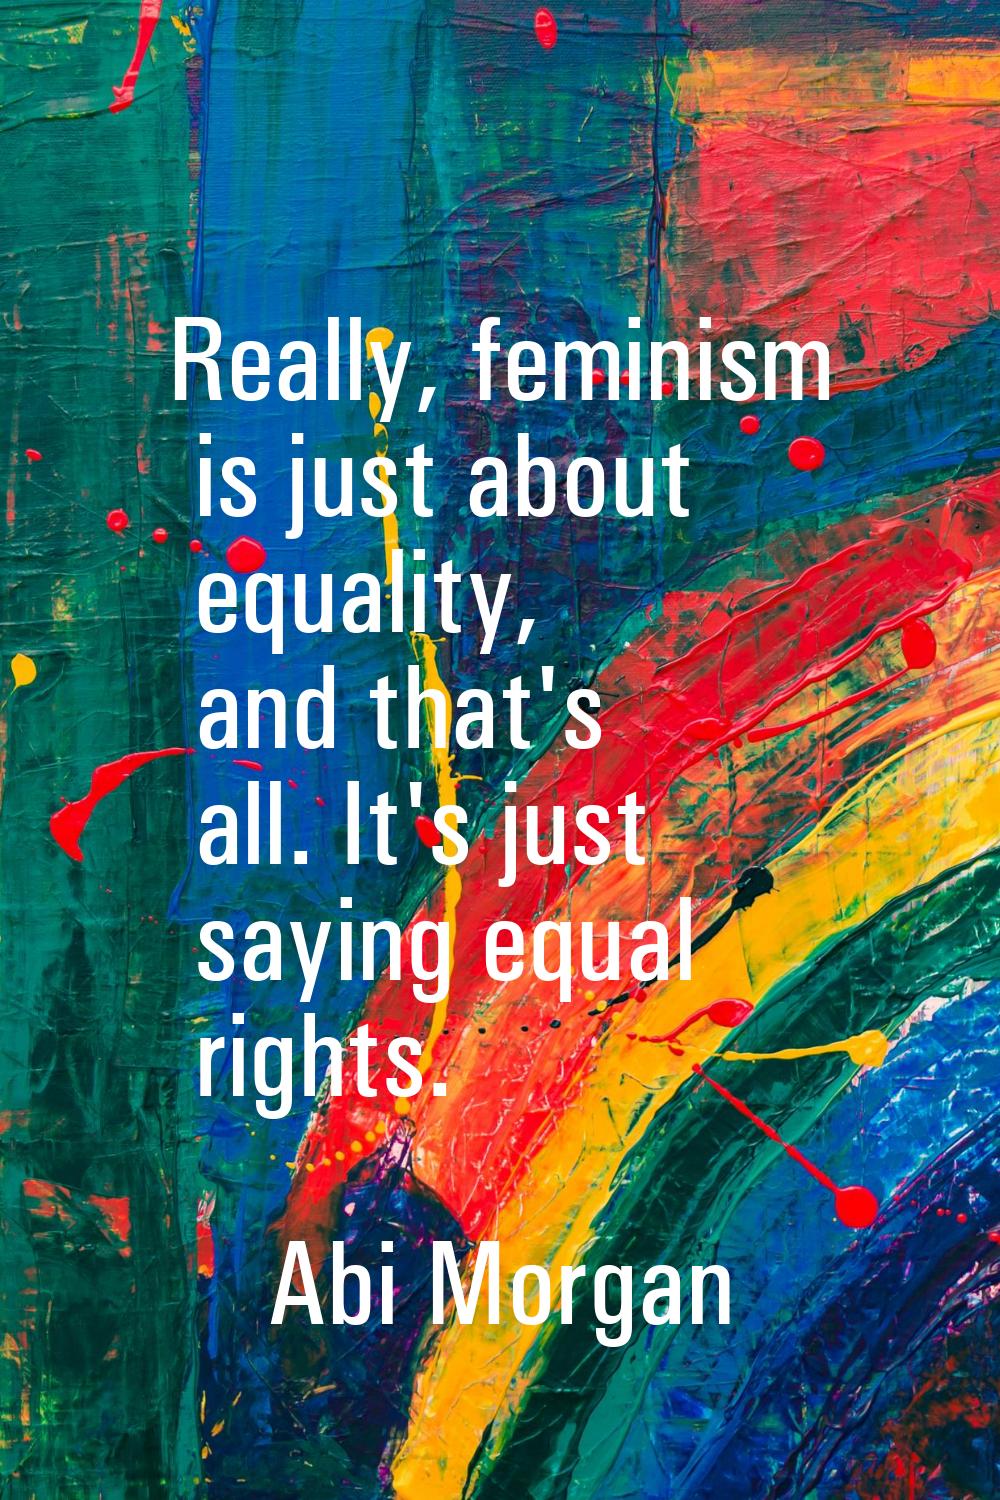 Really, feminism is just about equality, and that's all. It's just saying equal rights.